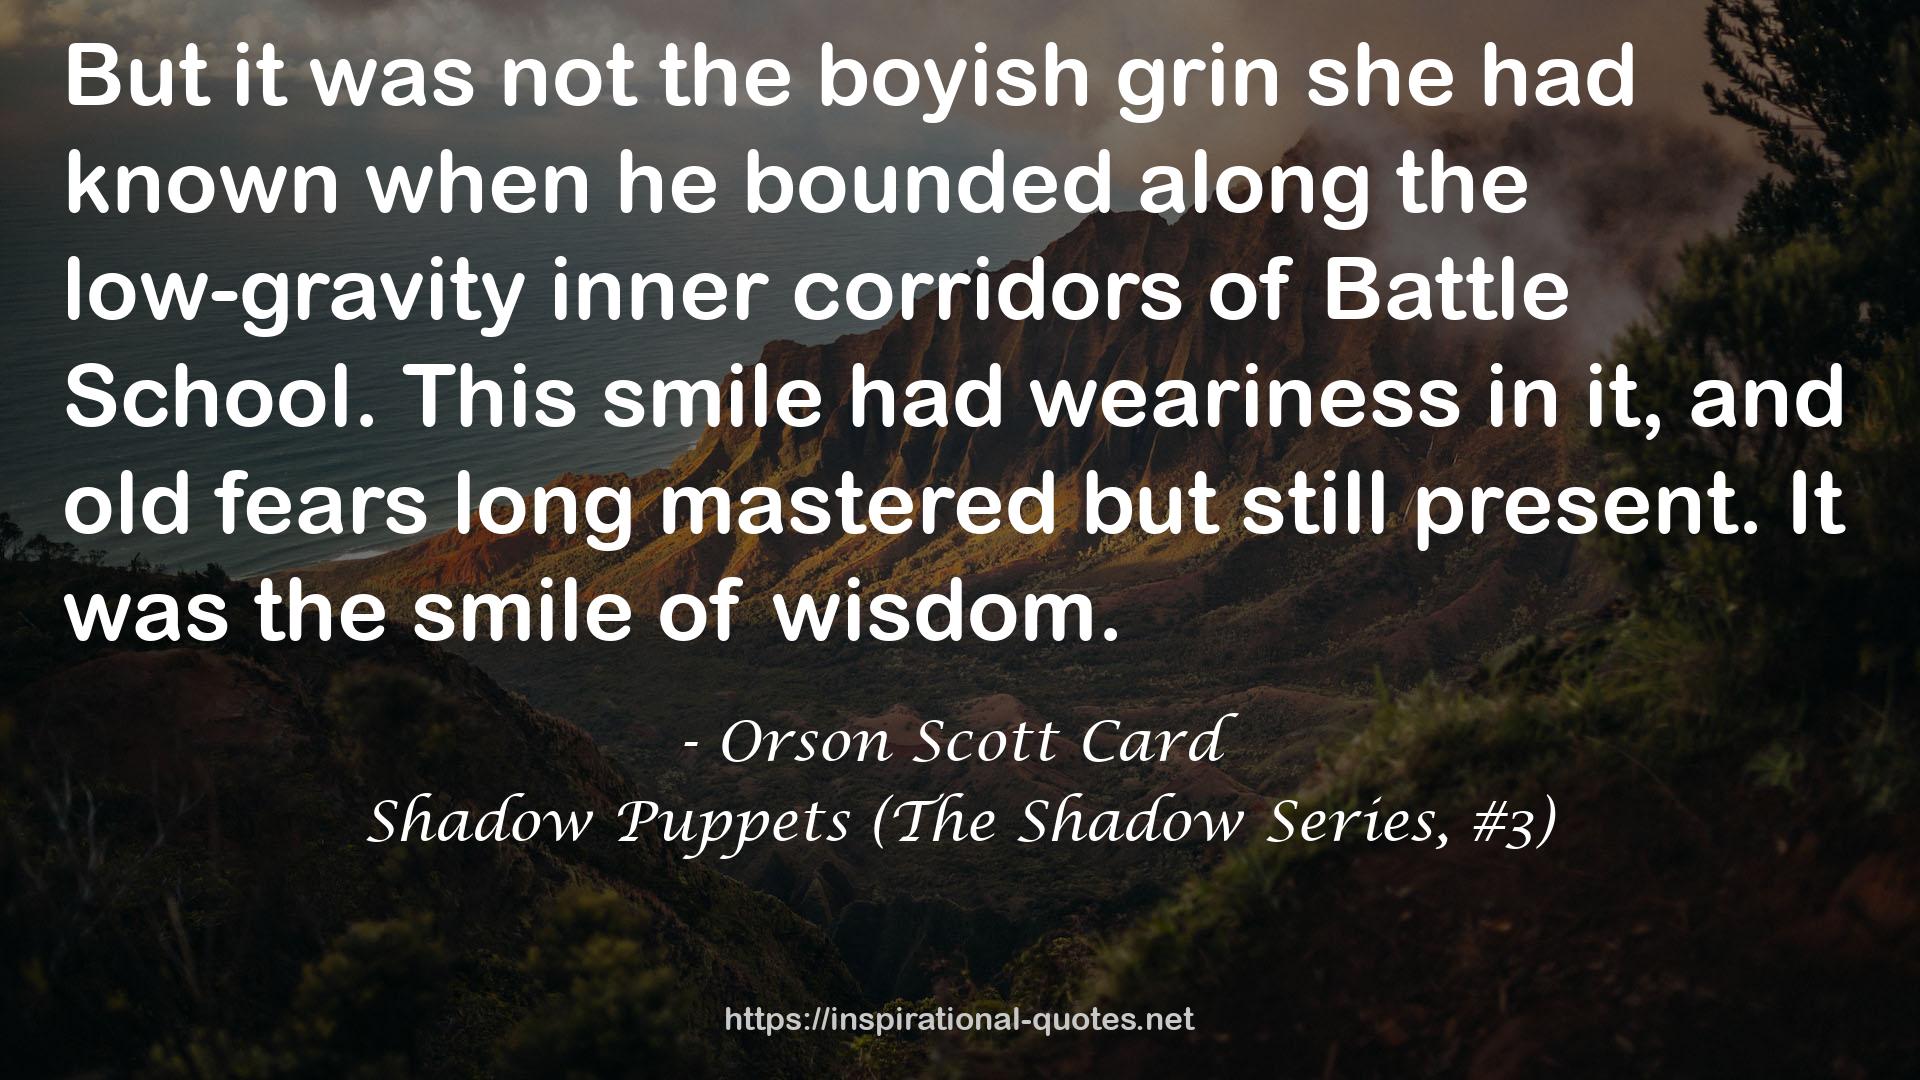 Shadow Puppets (The Shadow Series, #3) QUOTES